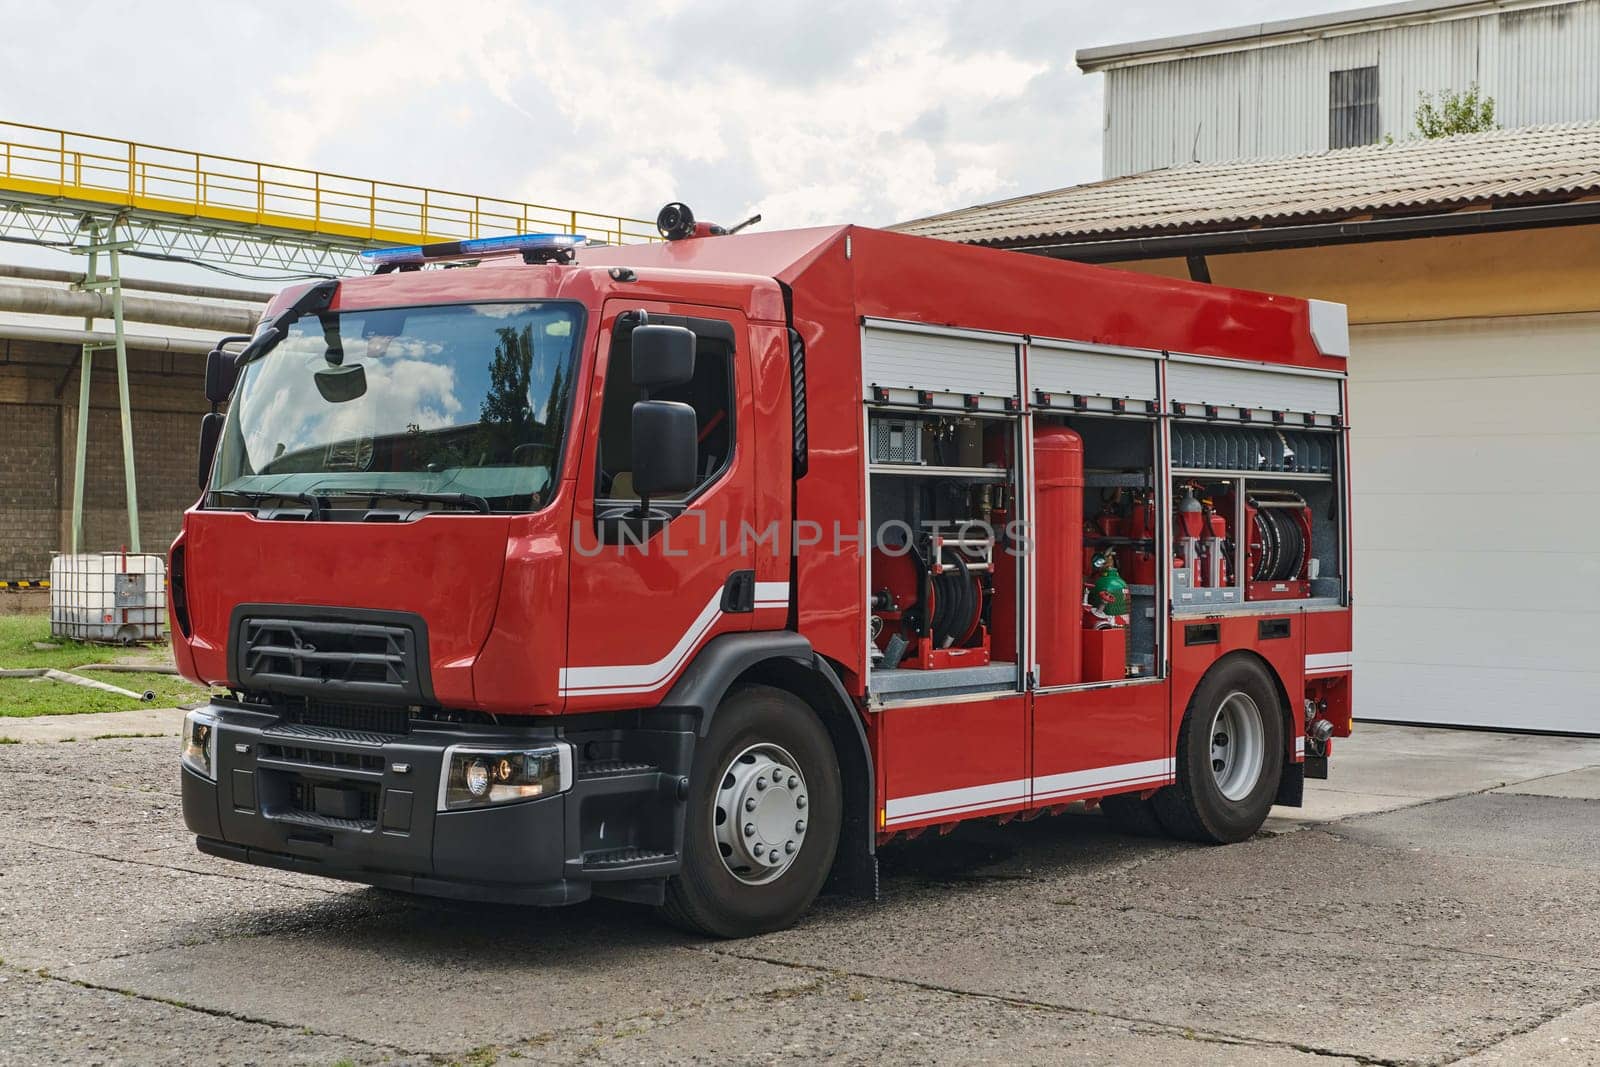 A state-of-the-art firetruck, equipped with advanced rescue technology, stands ready with its skilled firefighting team, prepared to intervene and respond rapidly to emergencies, ensuring the safety and protection of the community by dotshock